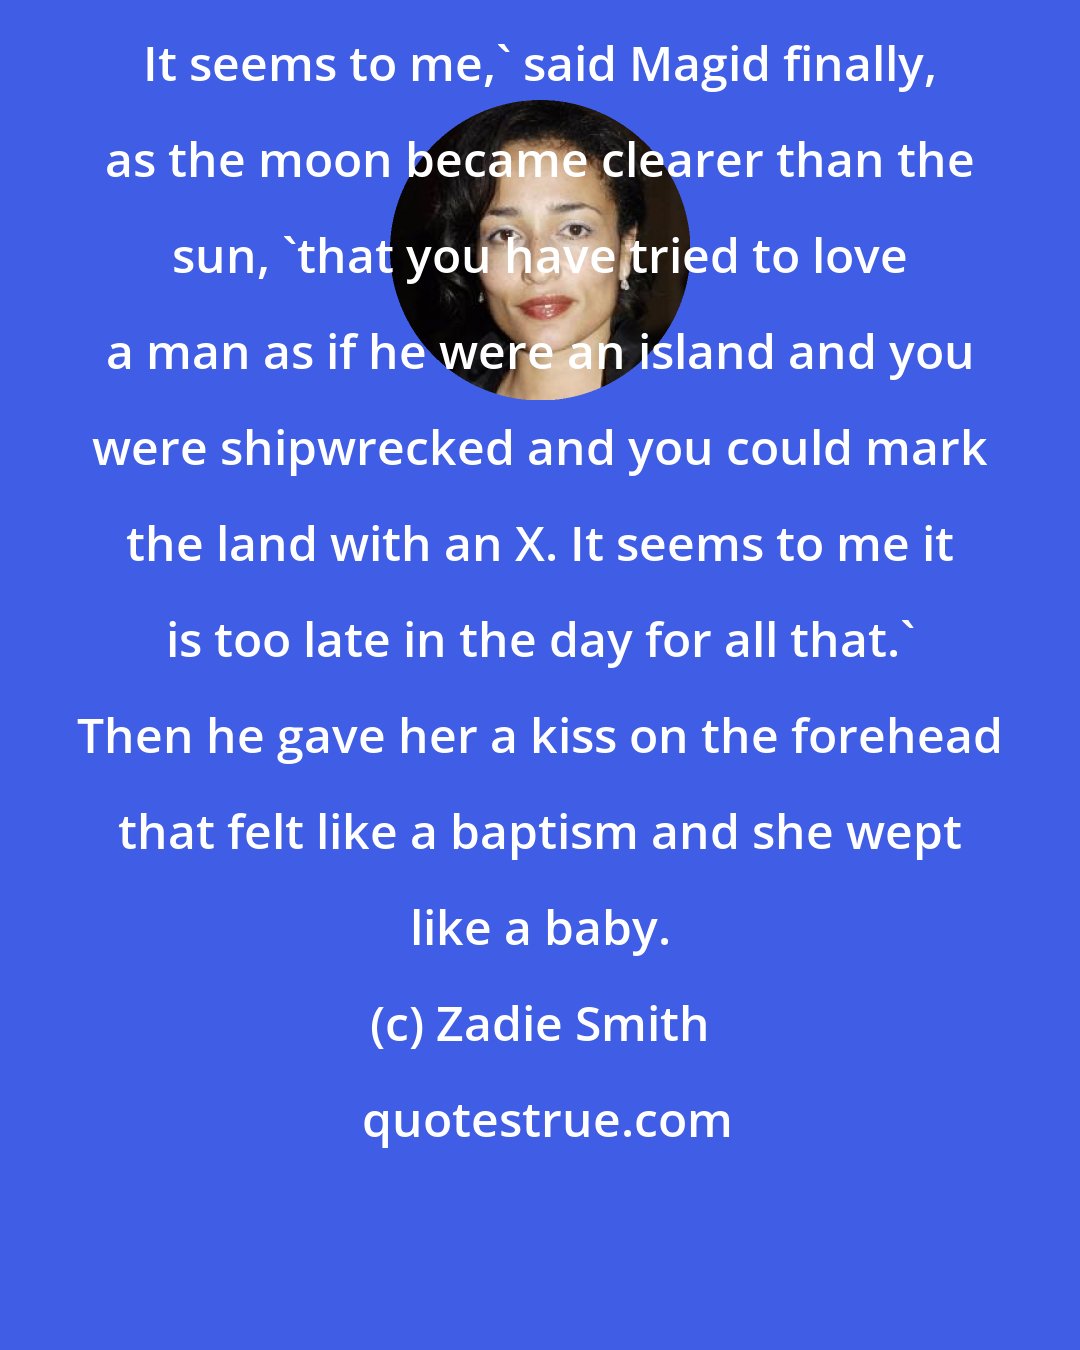 Zadie Smith: It seems to me,' said Magid finally, as the moon became clearer than the sun, 'that you have tried to love a man as if he were an island and you were shipwrecked and you could mark the land with an X. It seems to me it is too late in the day for all that.' Then he gave her a kiss on the forehead that felt like a baptism and she wept like a baby.